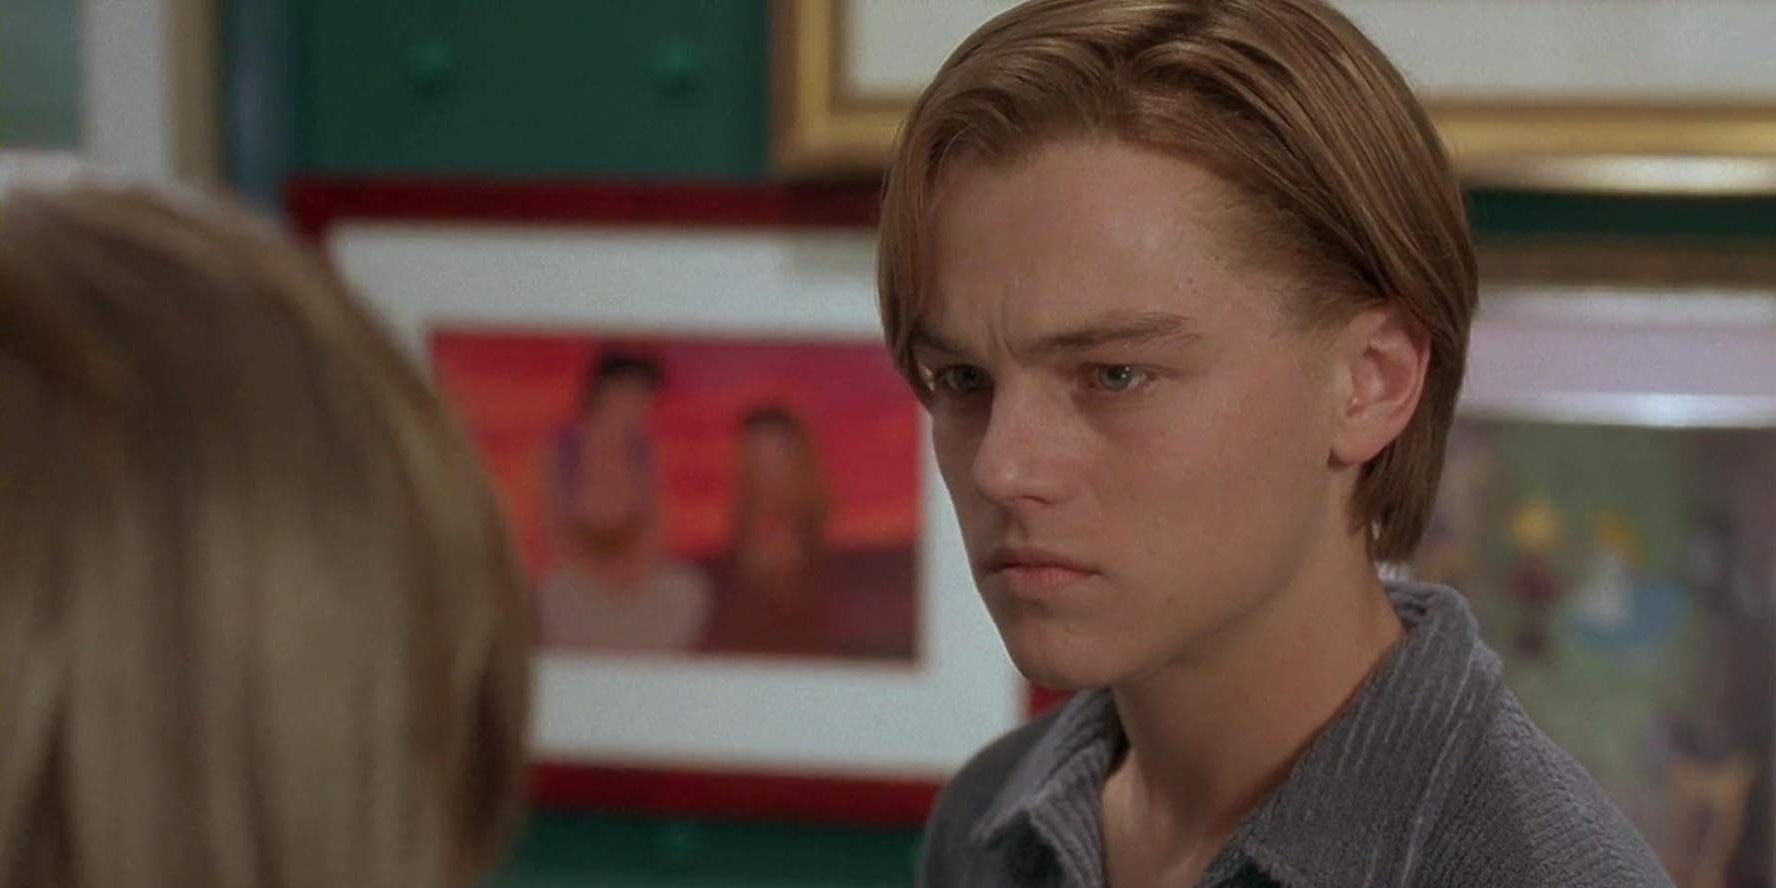 Every Leonardo DiCaprio Movie Ranked From Worst to Best